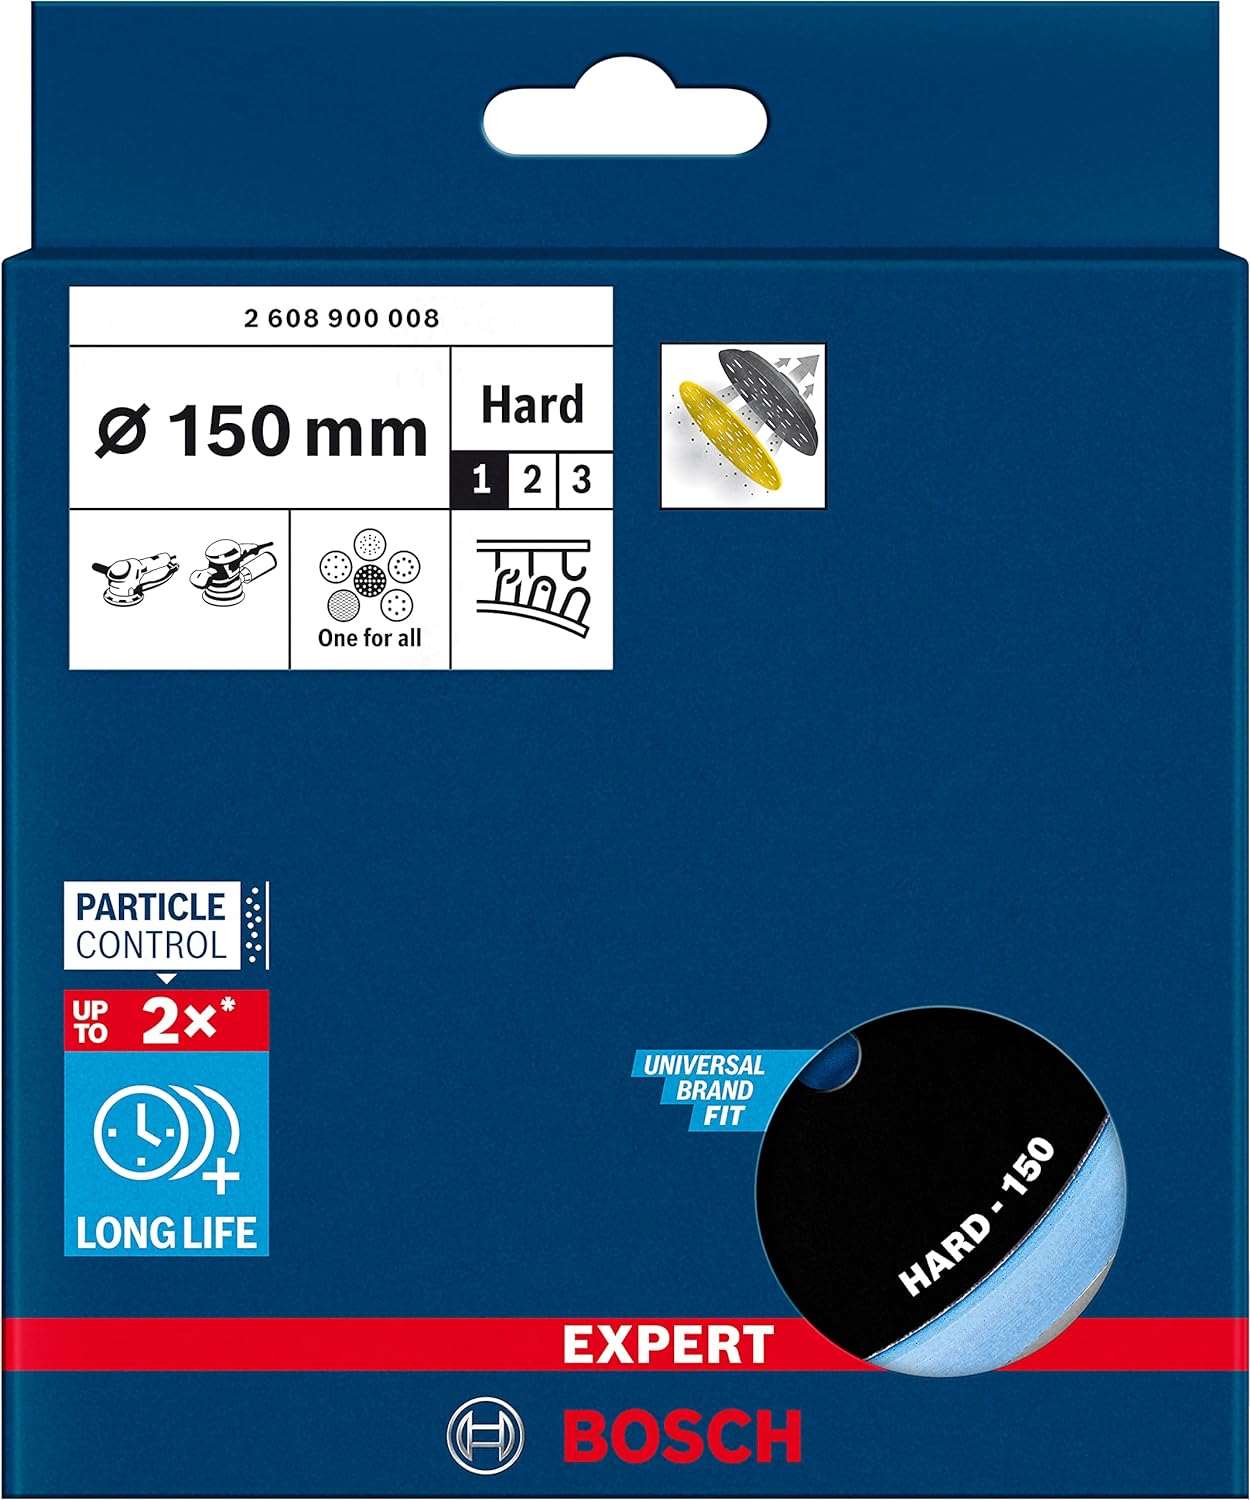 Bosch Backing pad 150mm, hard 2608900008 Power Tool Services